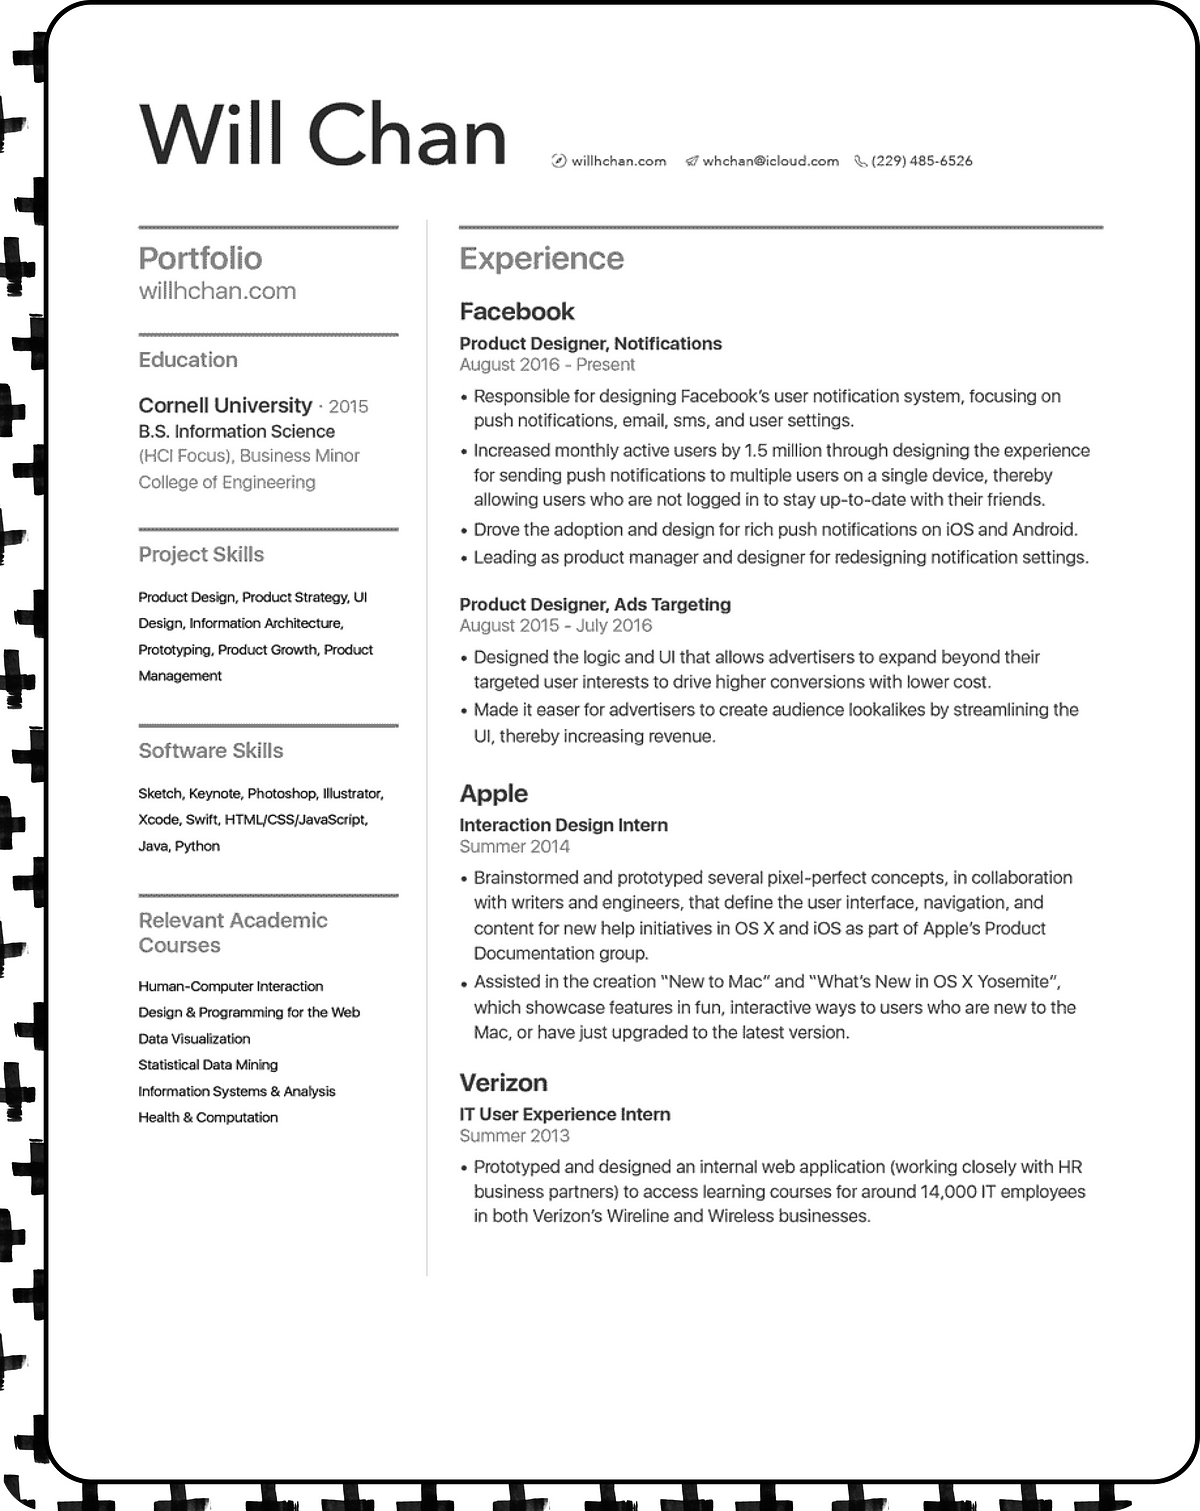 Resume Sections: How to Organize Your Resume